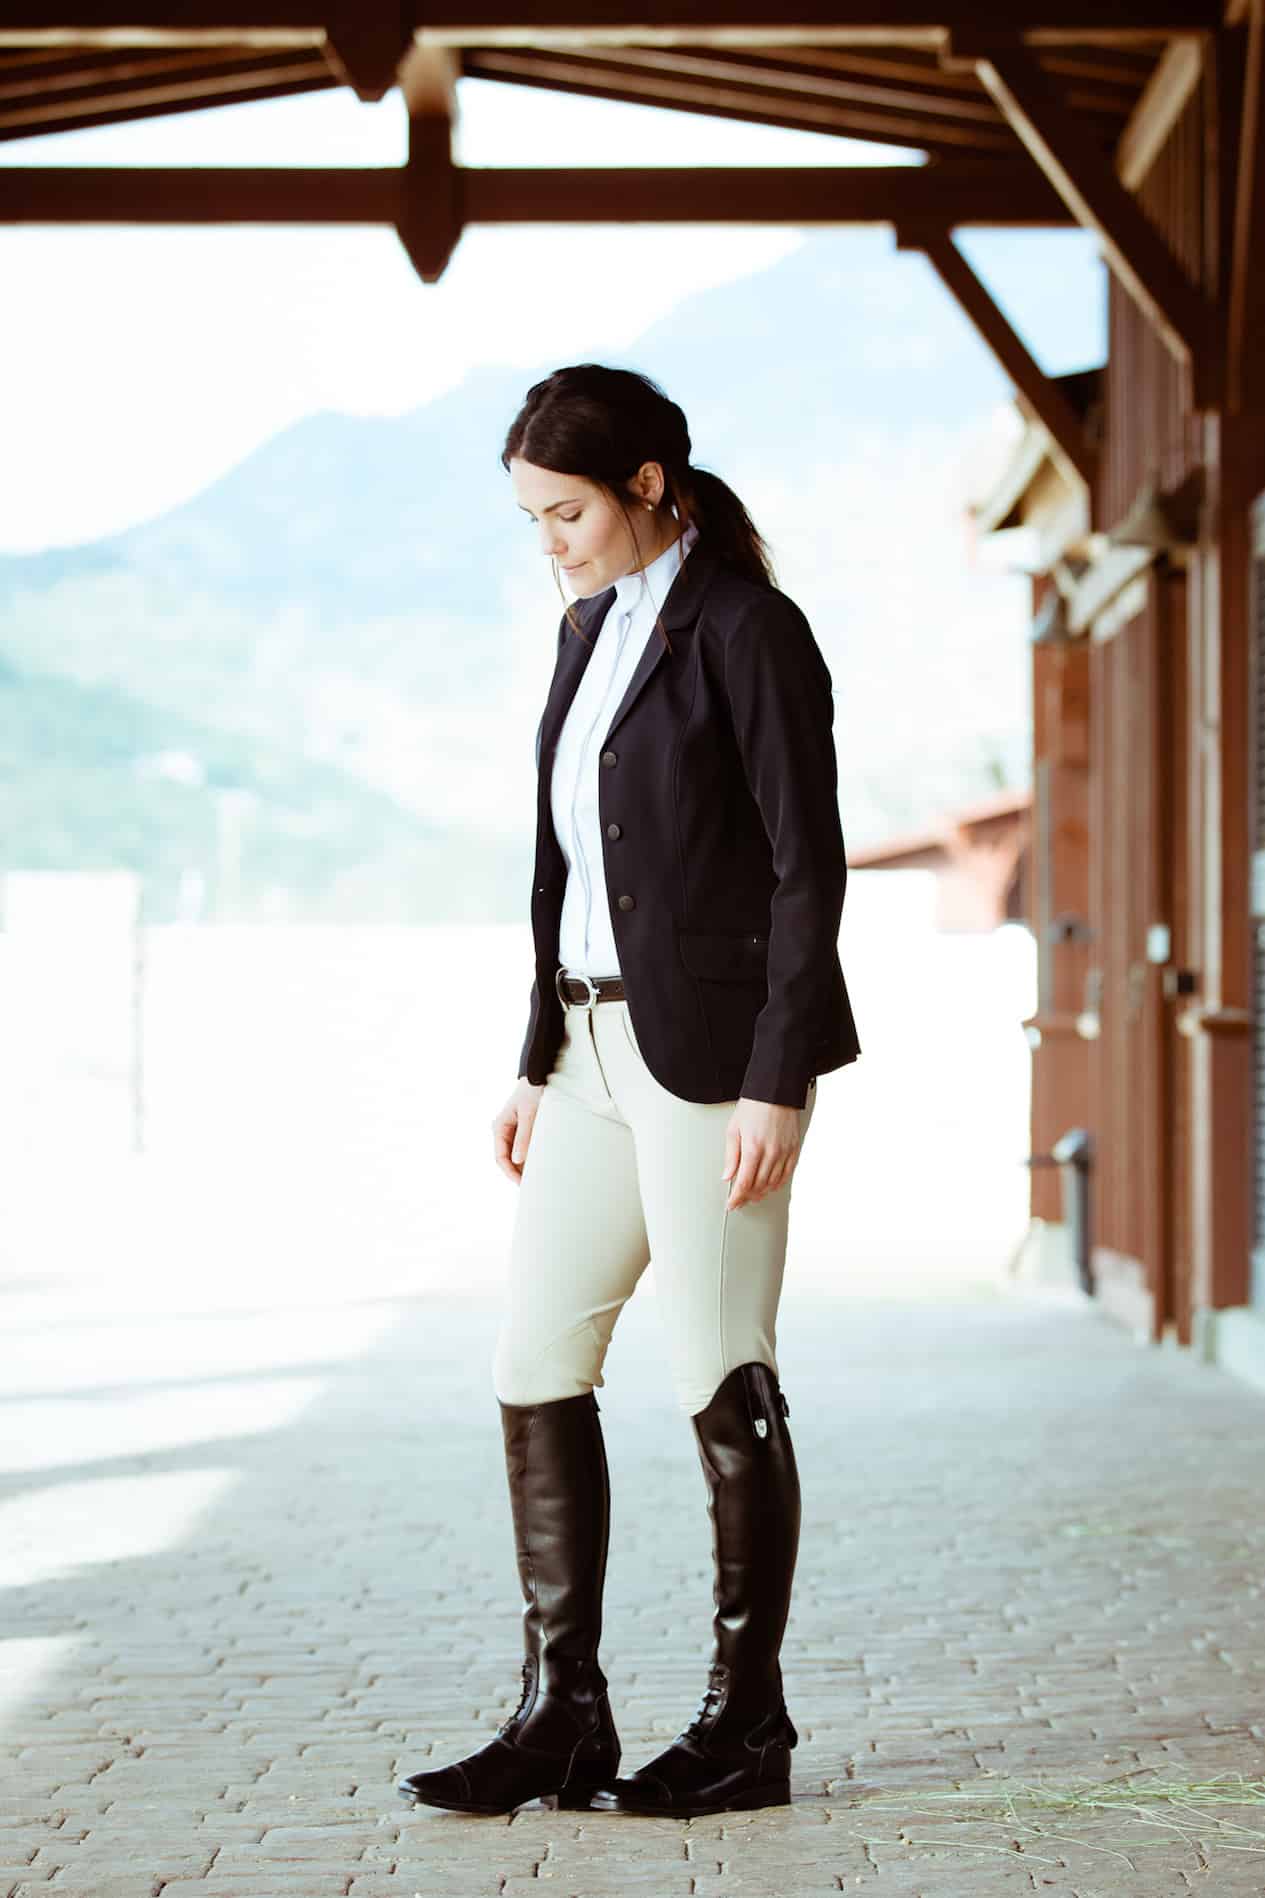 image of a woman standing in stables wearing an English equestrian outfit with a blazer, white shirt, riding leggings, and riding boots